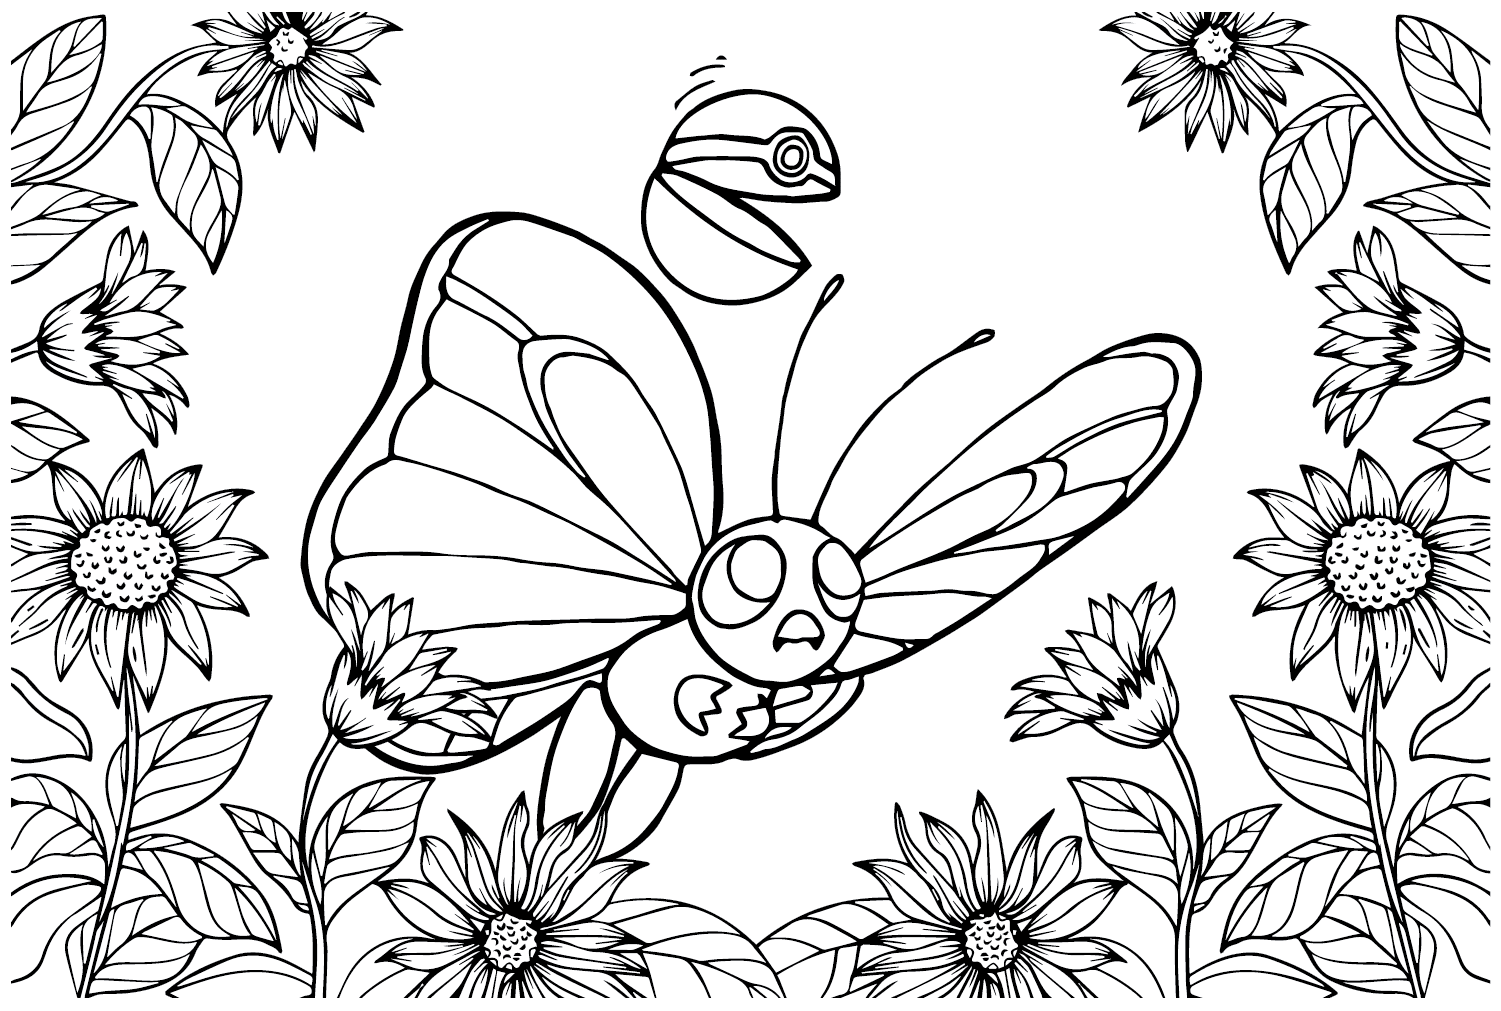 Butterfree Pokemon Coloring Page from Butterfree